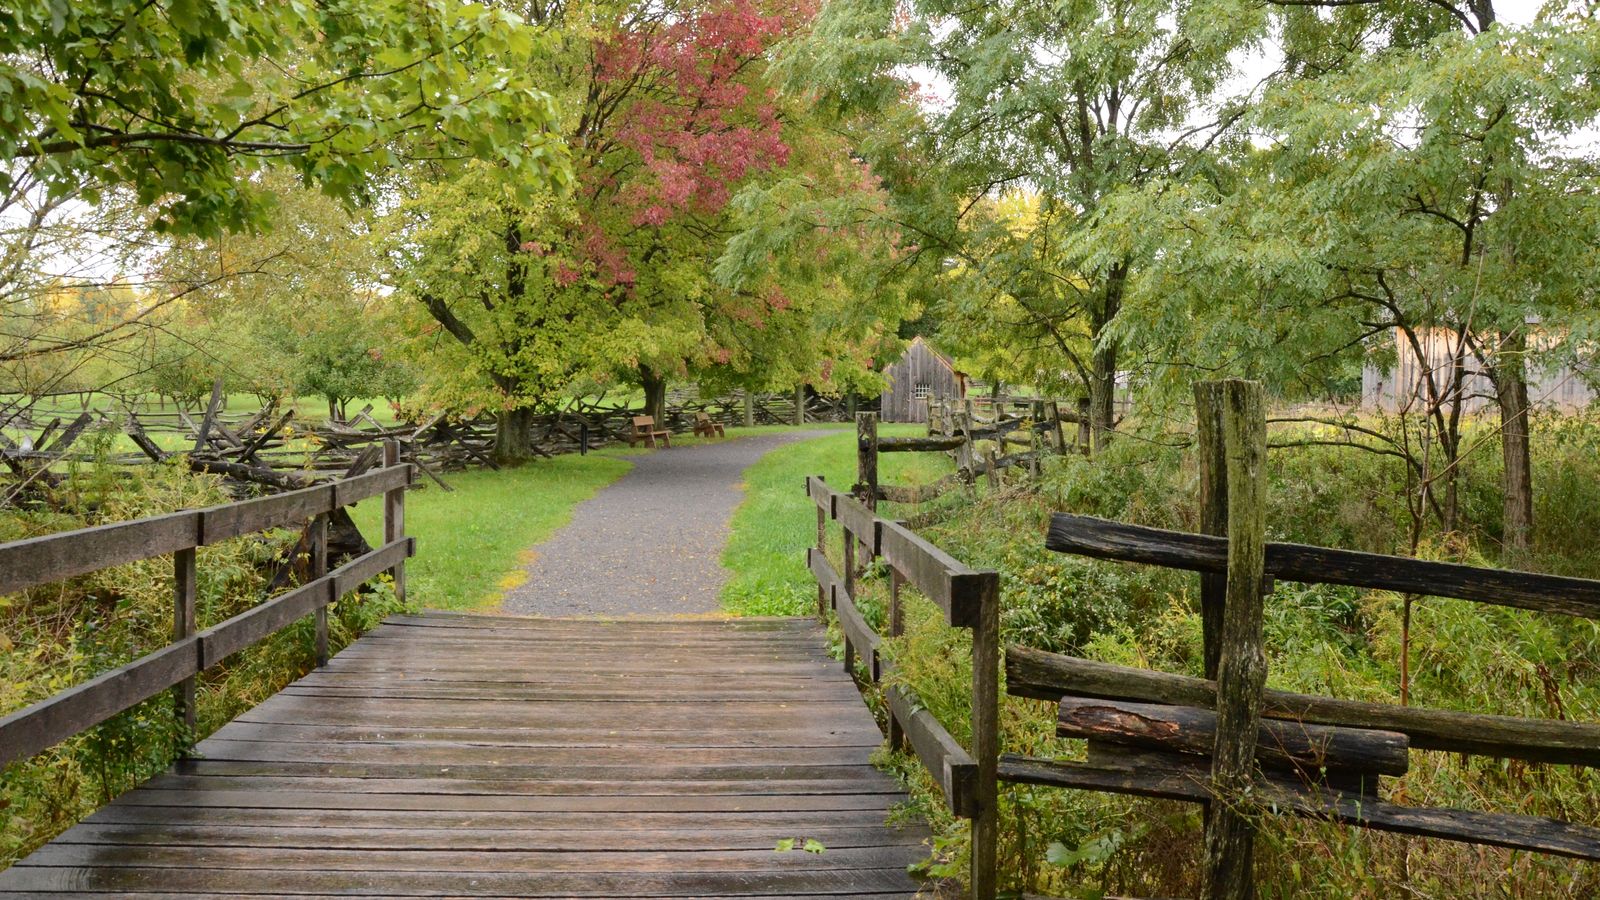 Wooden footbridge with railings and pathway with trees that lead to the Sacred Grove in autumn.  (horiz)